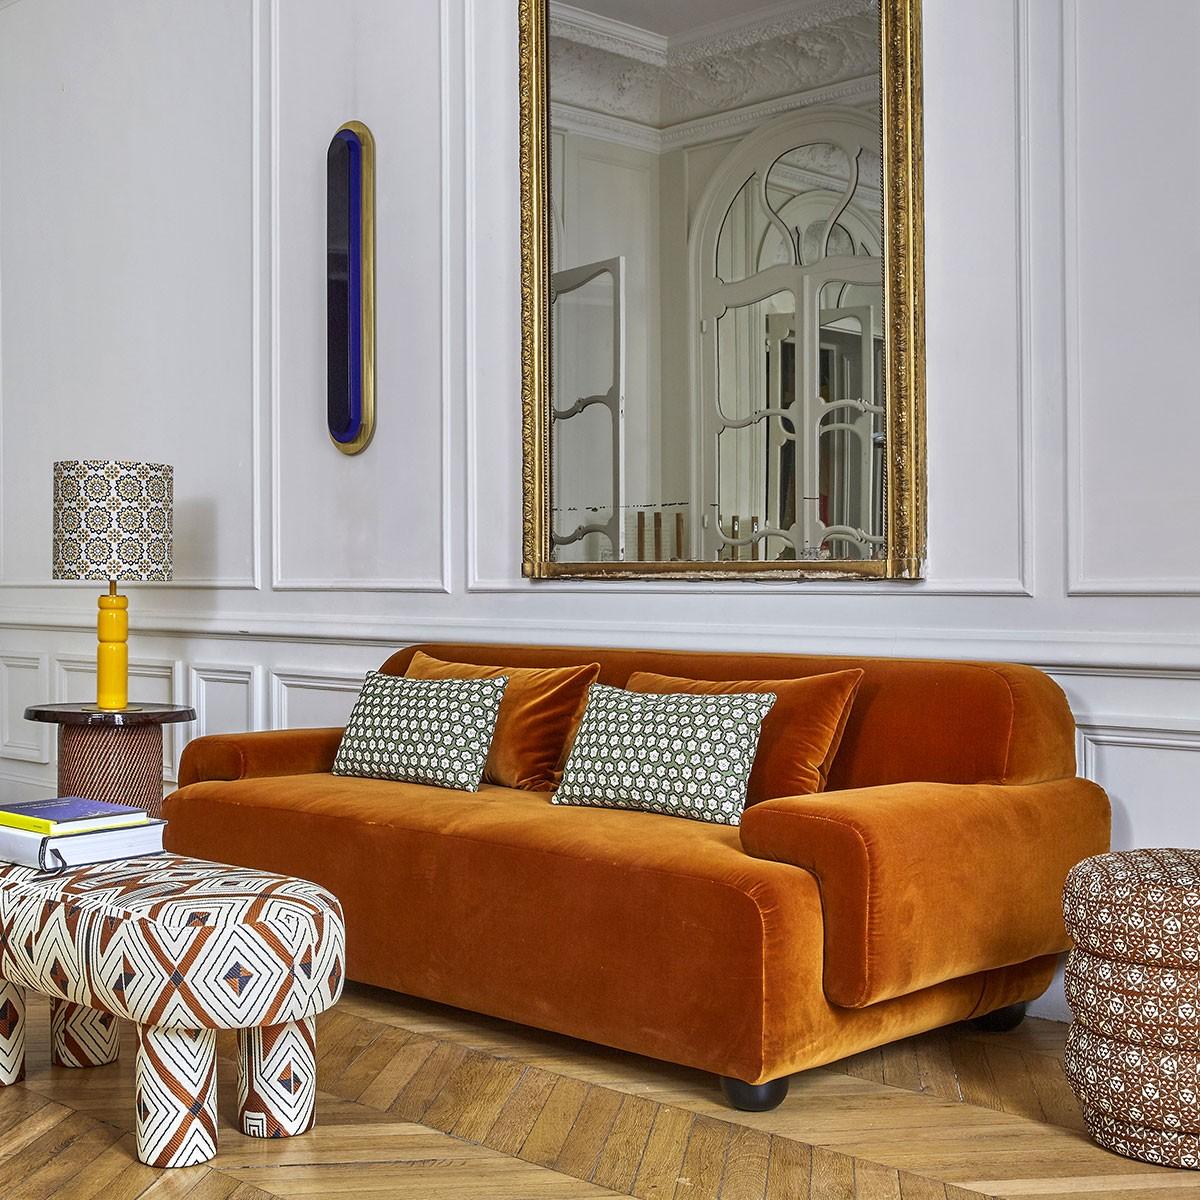 Popus Editions Lena 4-seater sofa in Marrakesh London Linen Fabric
 
It looks like it's straight out of a movie, with its generous curves and wide armrests. It is a real invitation to spend long Sundays with the family, comfortably seated in front